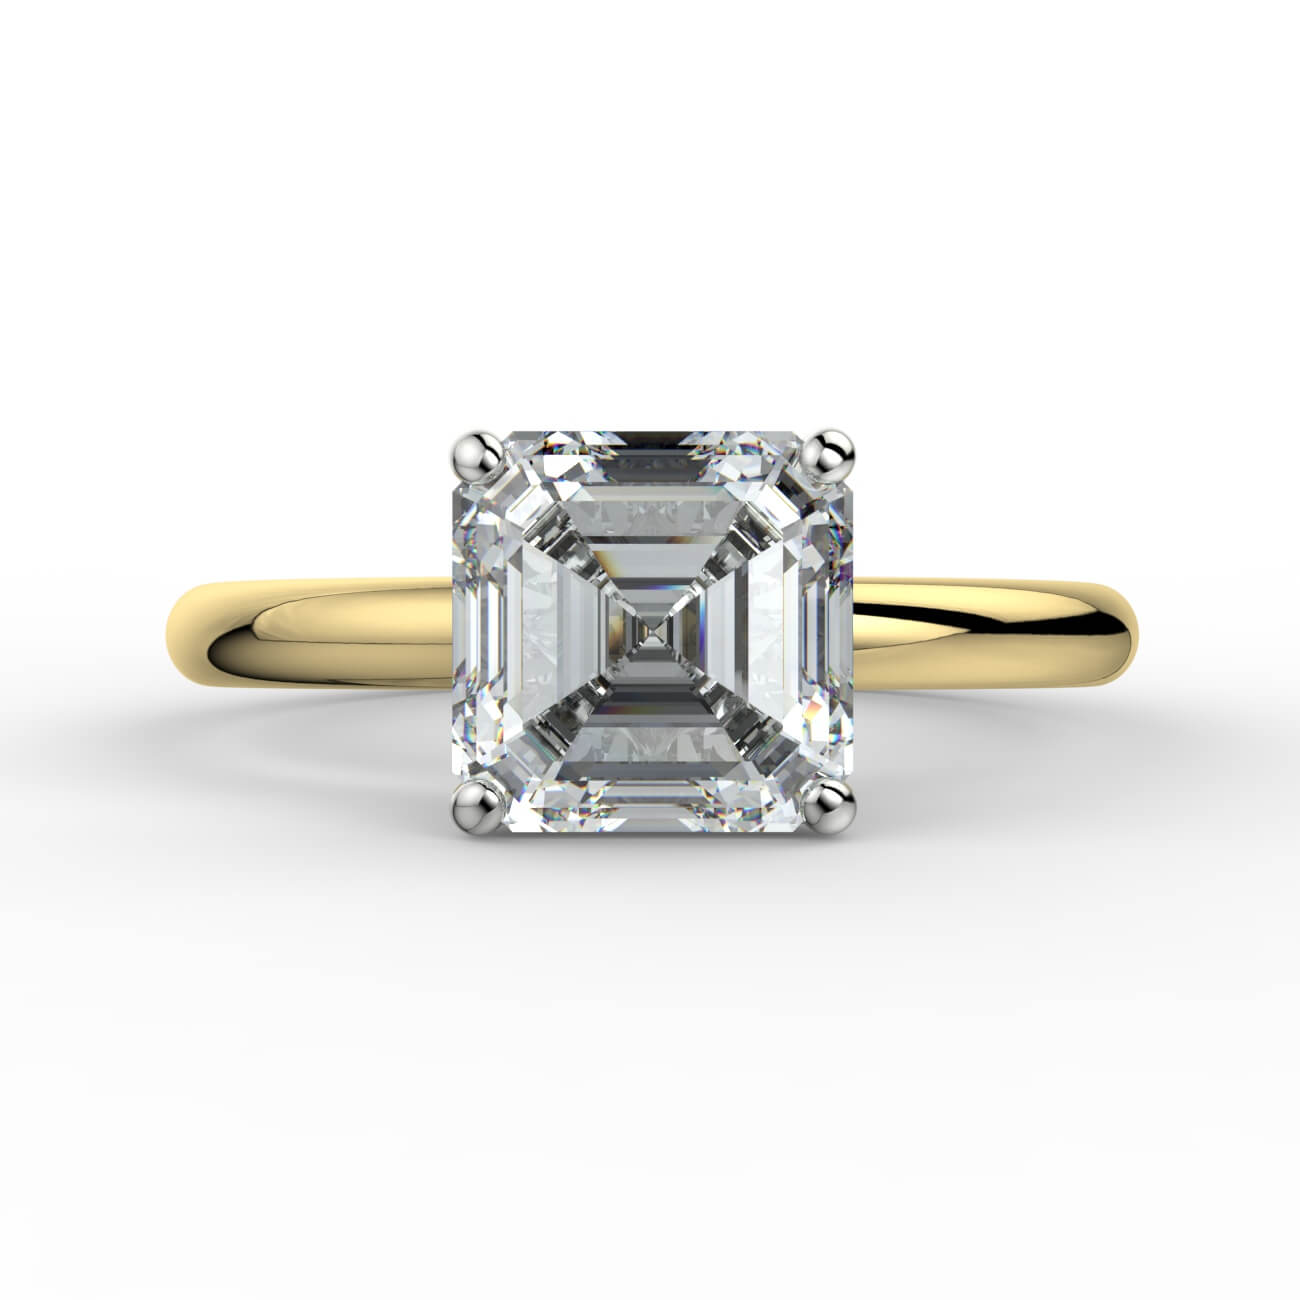 Comfort fit 4 claw asscher cut solitaire diamond ring in white and yellow gold – Australian Diamond Network